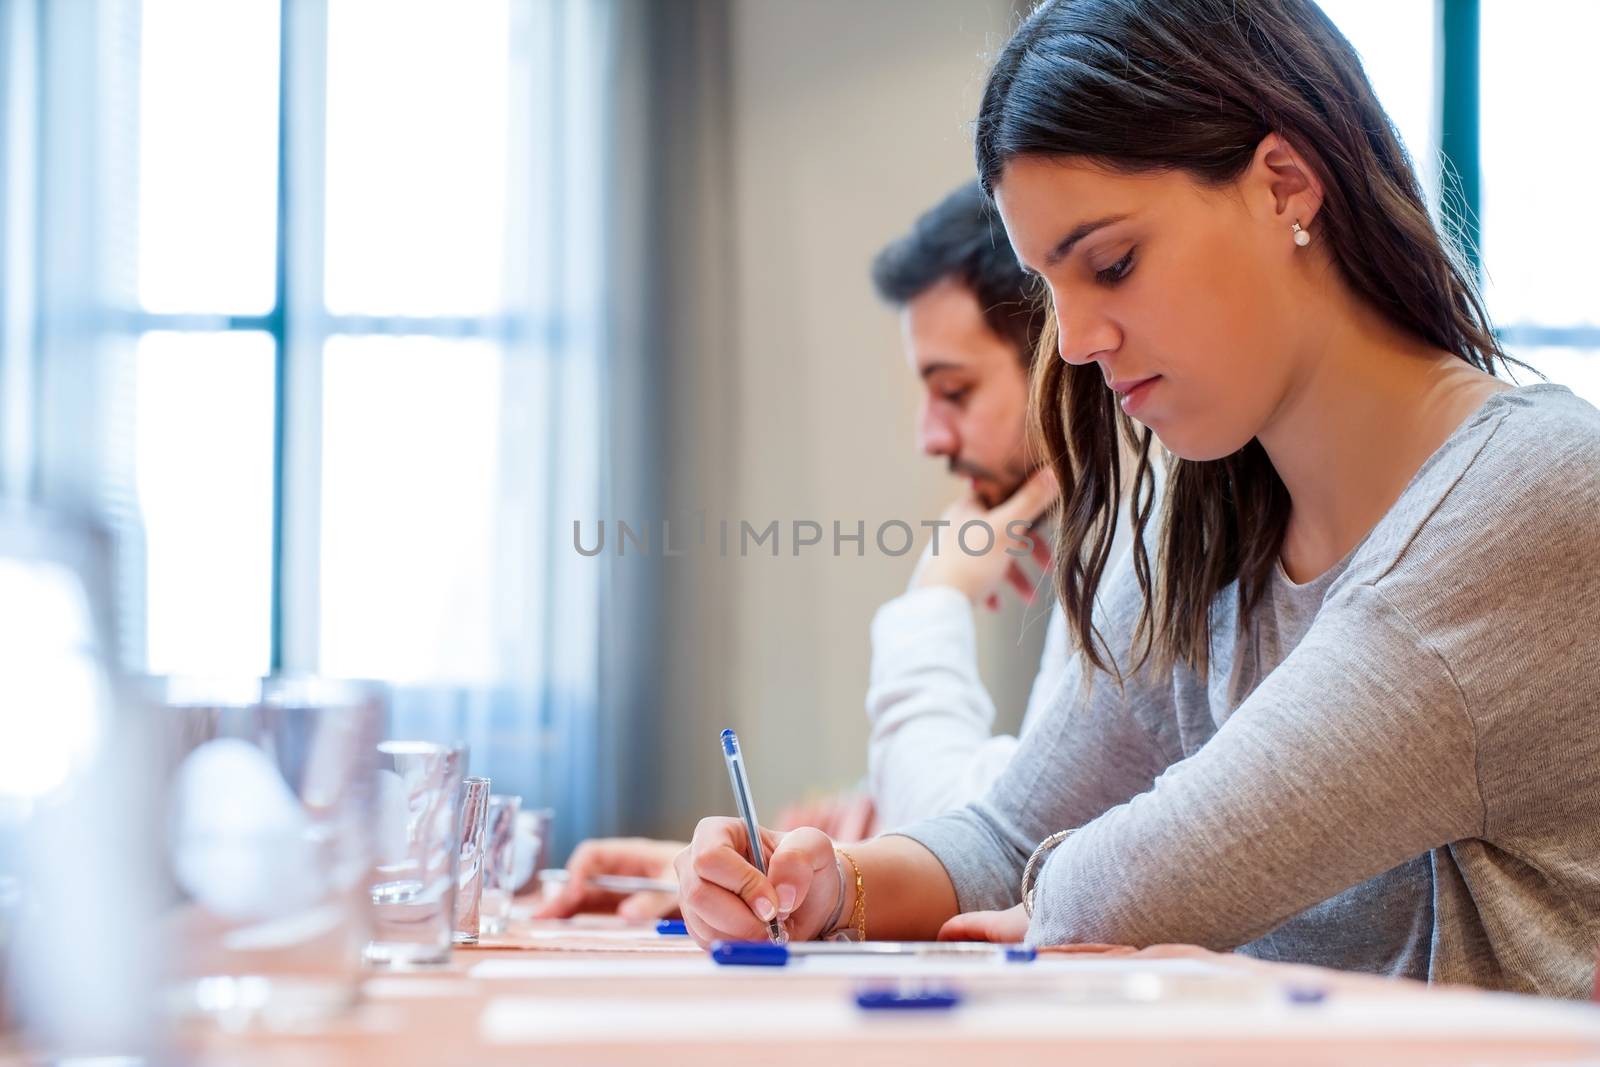 Portrait of young students at work in Hotel conference room. Young woman writing with pen at desk.